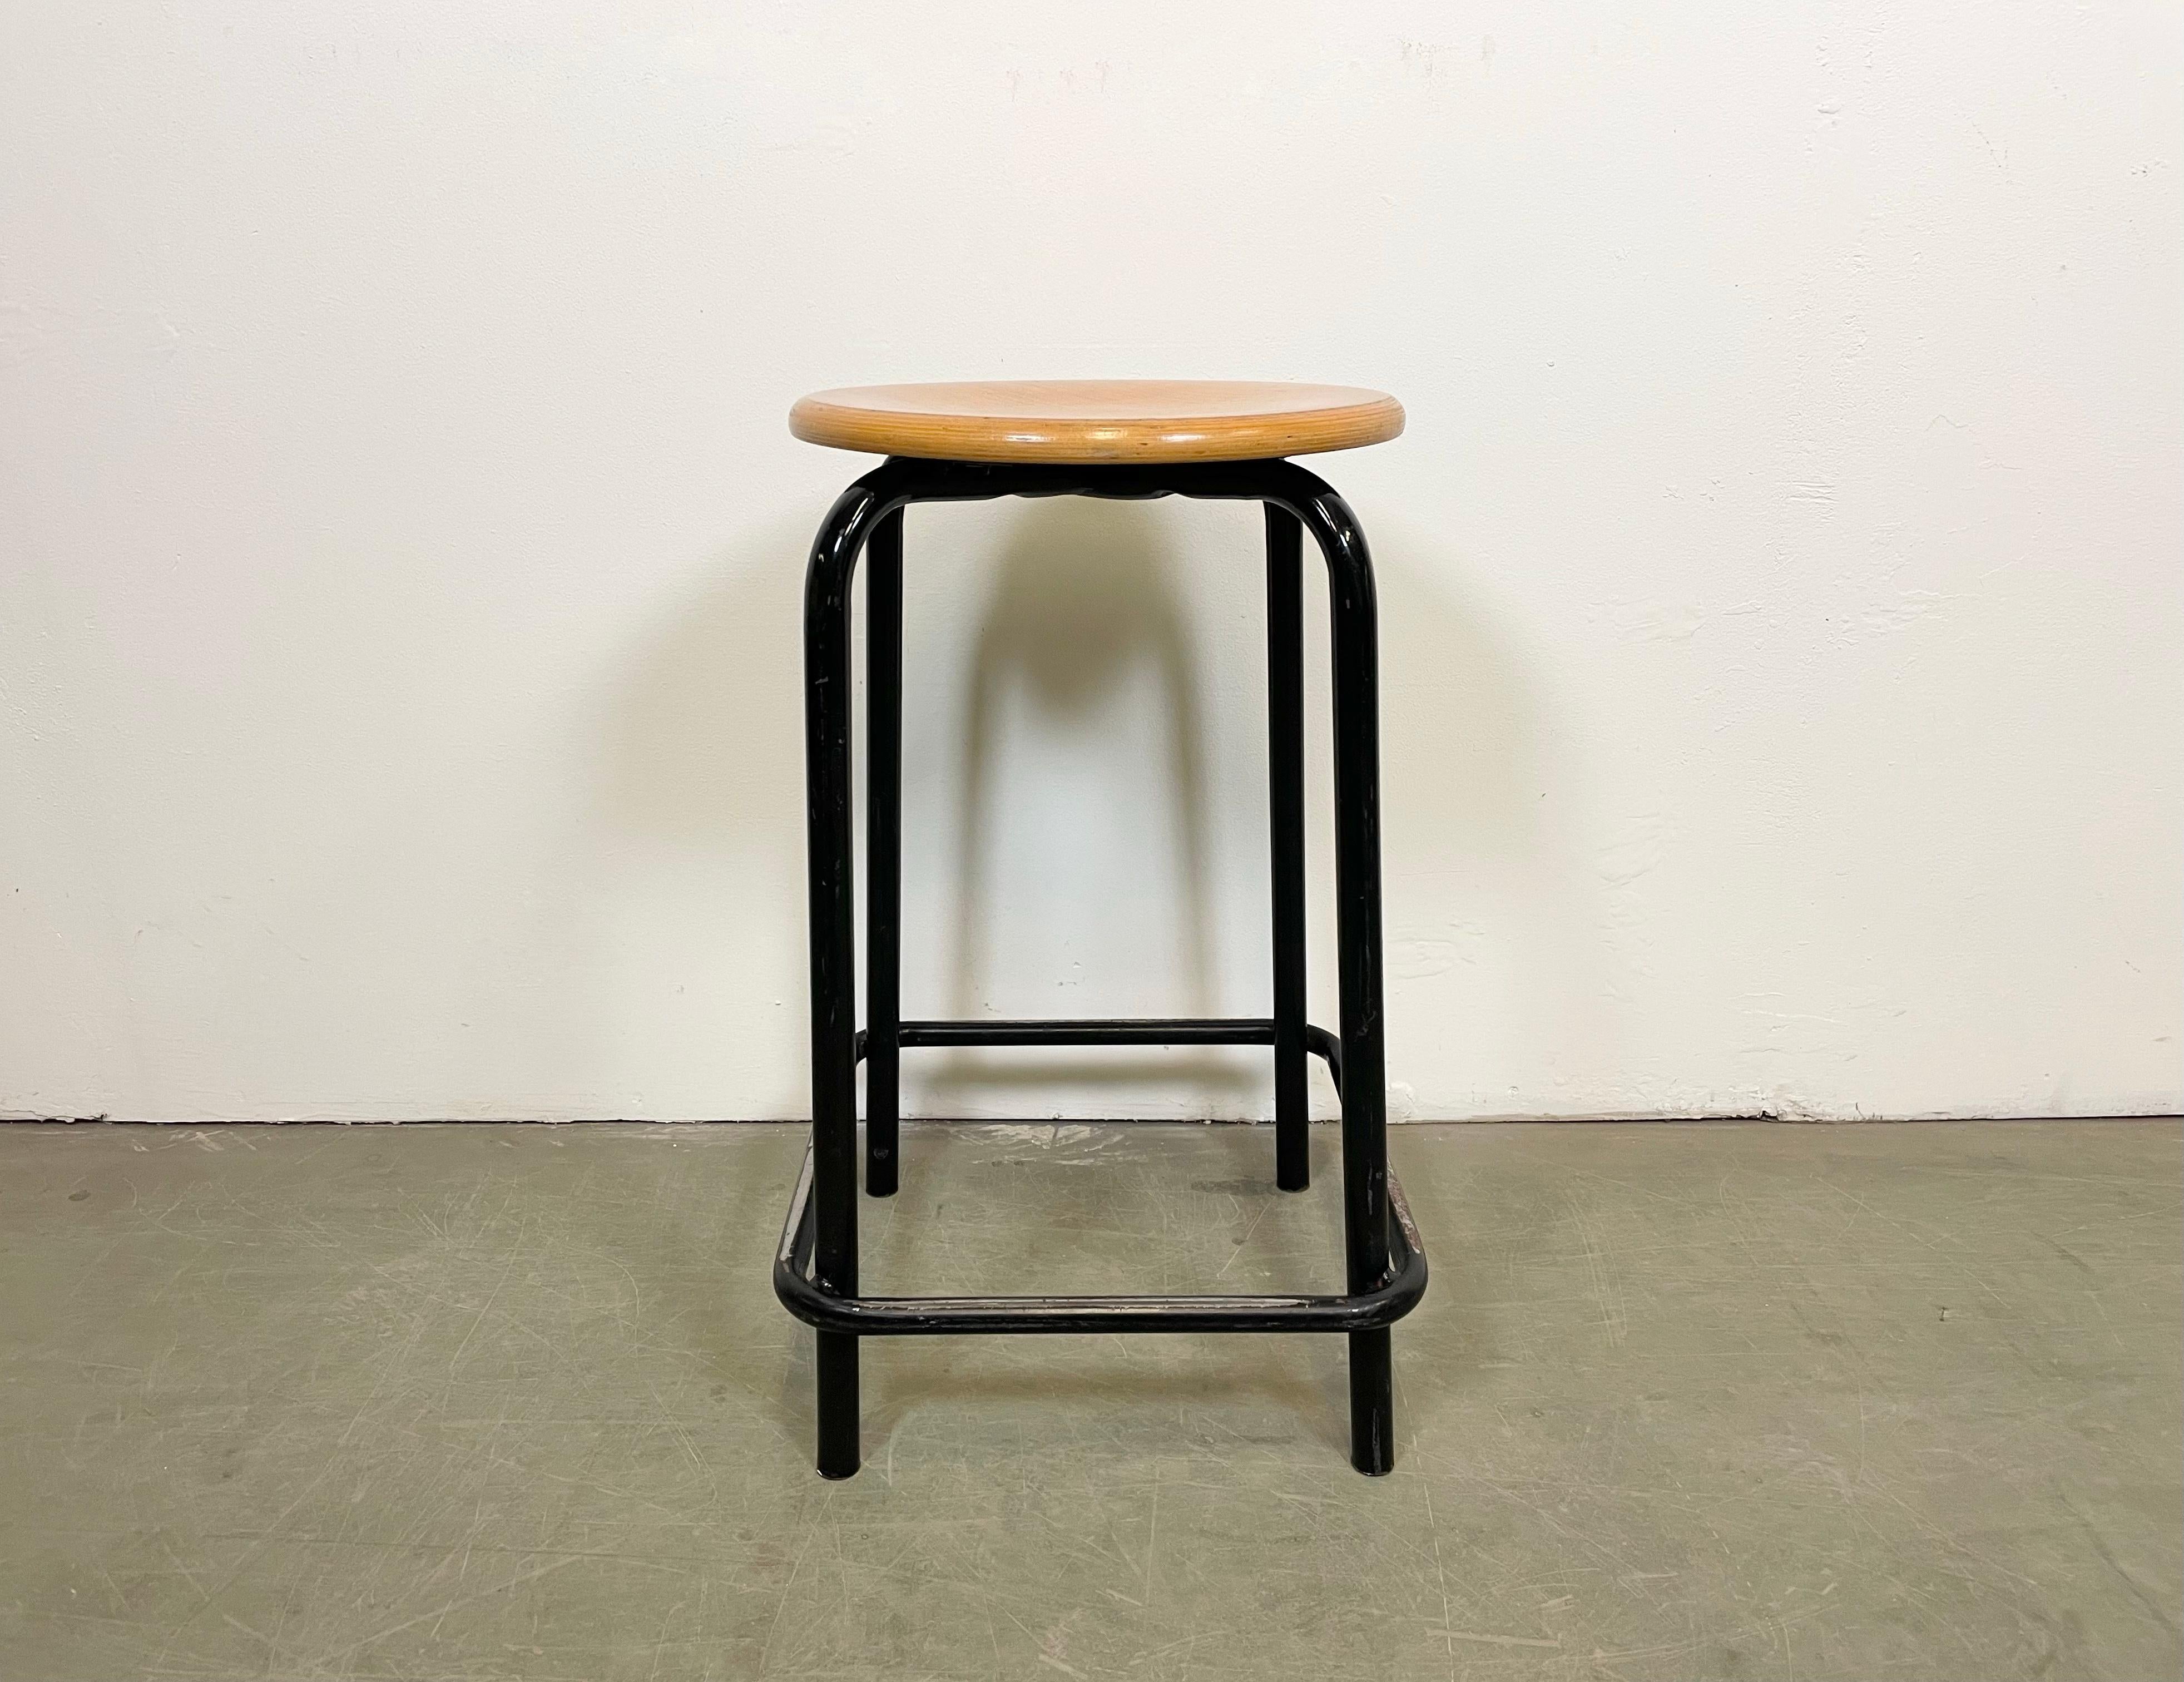 Vintage Industrial stackable stool made in Italy during the 1970s. The stool consists of an iron structure and a wooden seat. More pieces on the stock.
Measures: Seat height : 55 cm
Seat diameter : 32 cm
Weight : 4 kg.